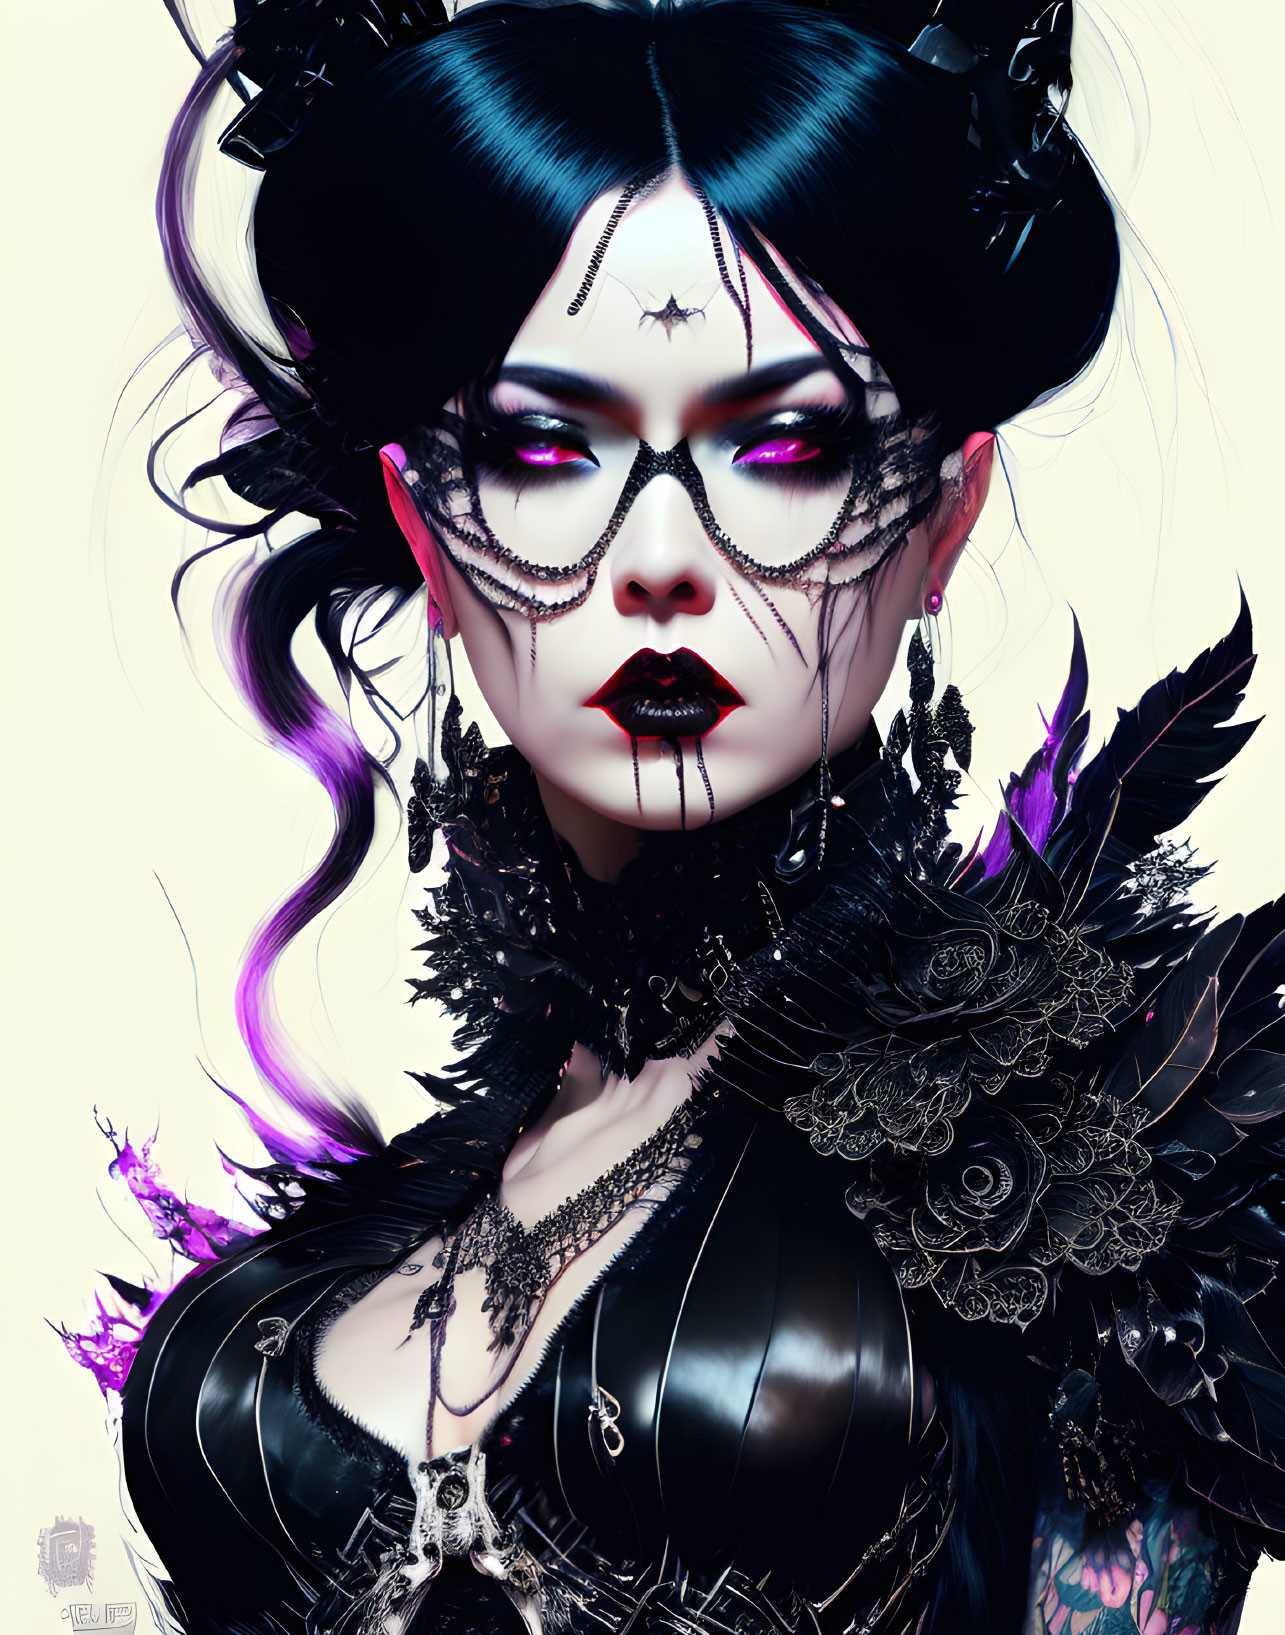 Gothic-style fantasy character with dark makeup and elaborate black headwear